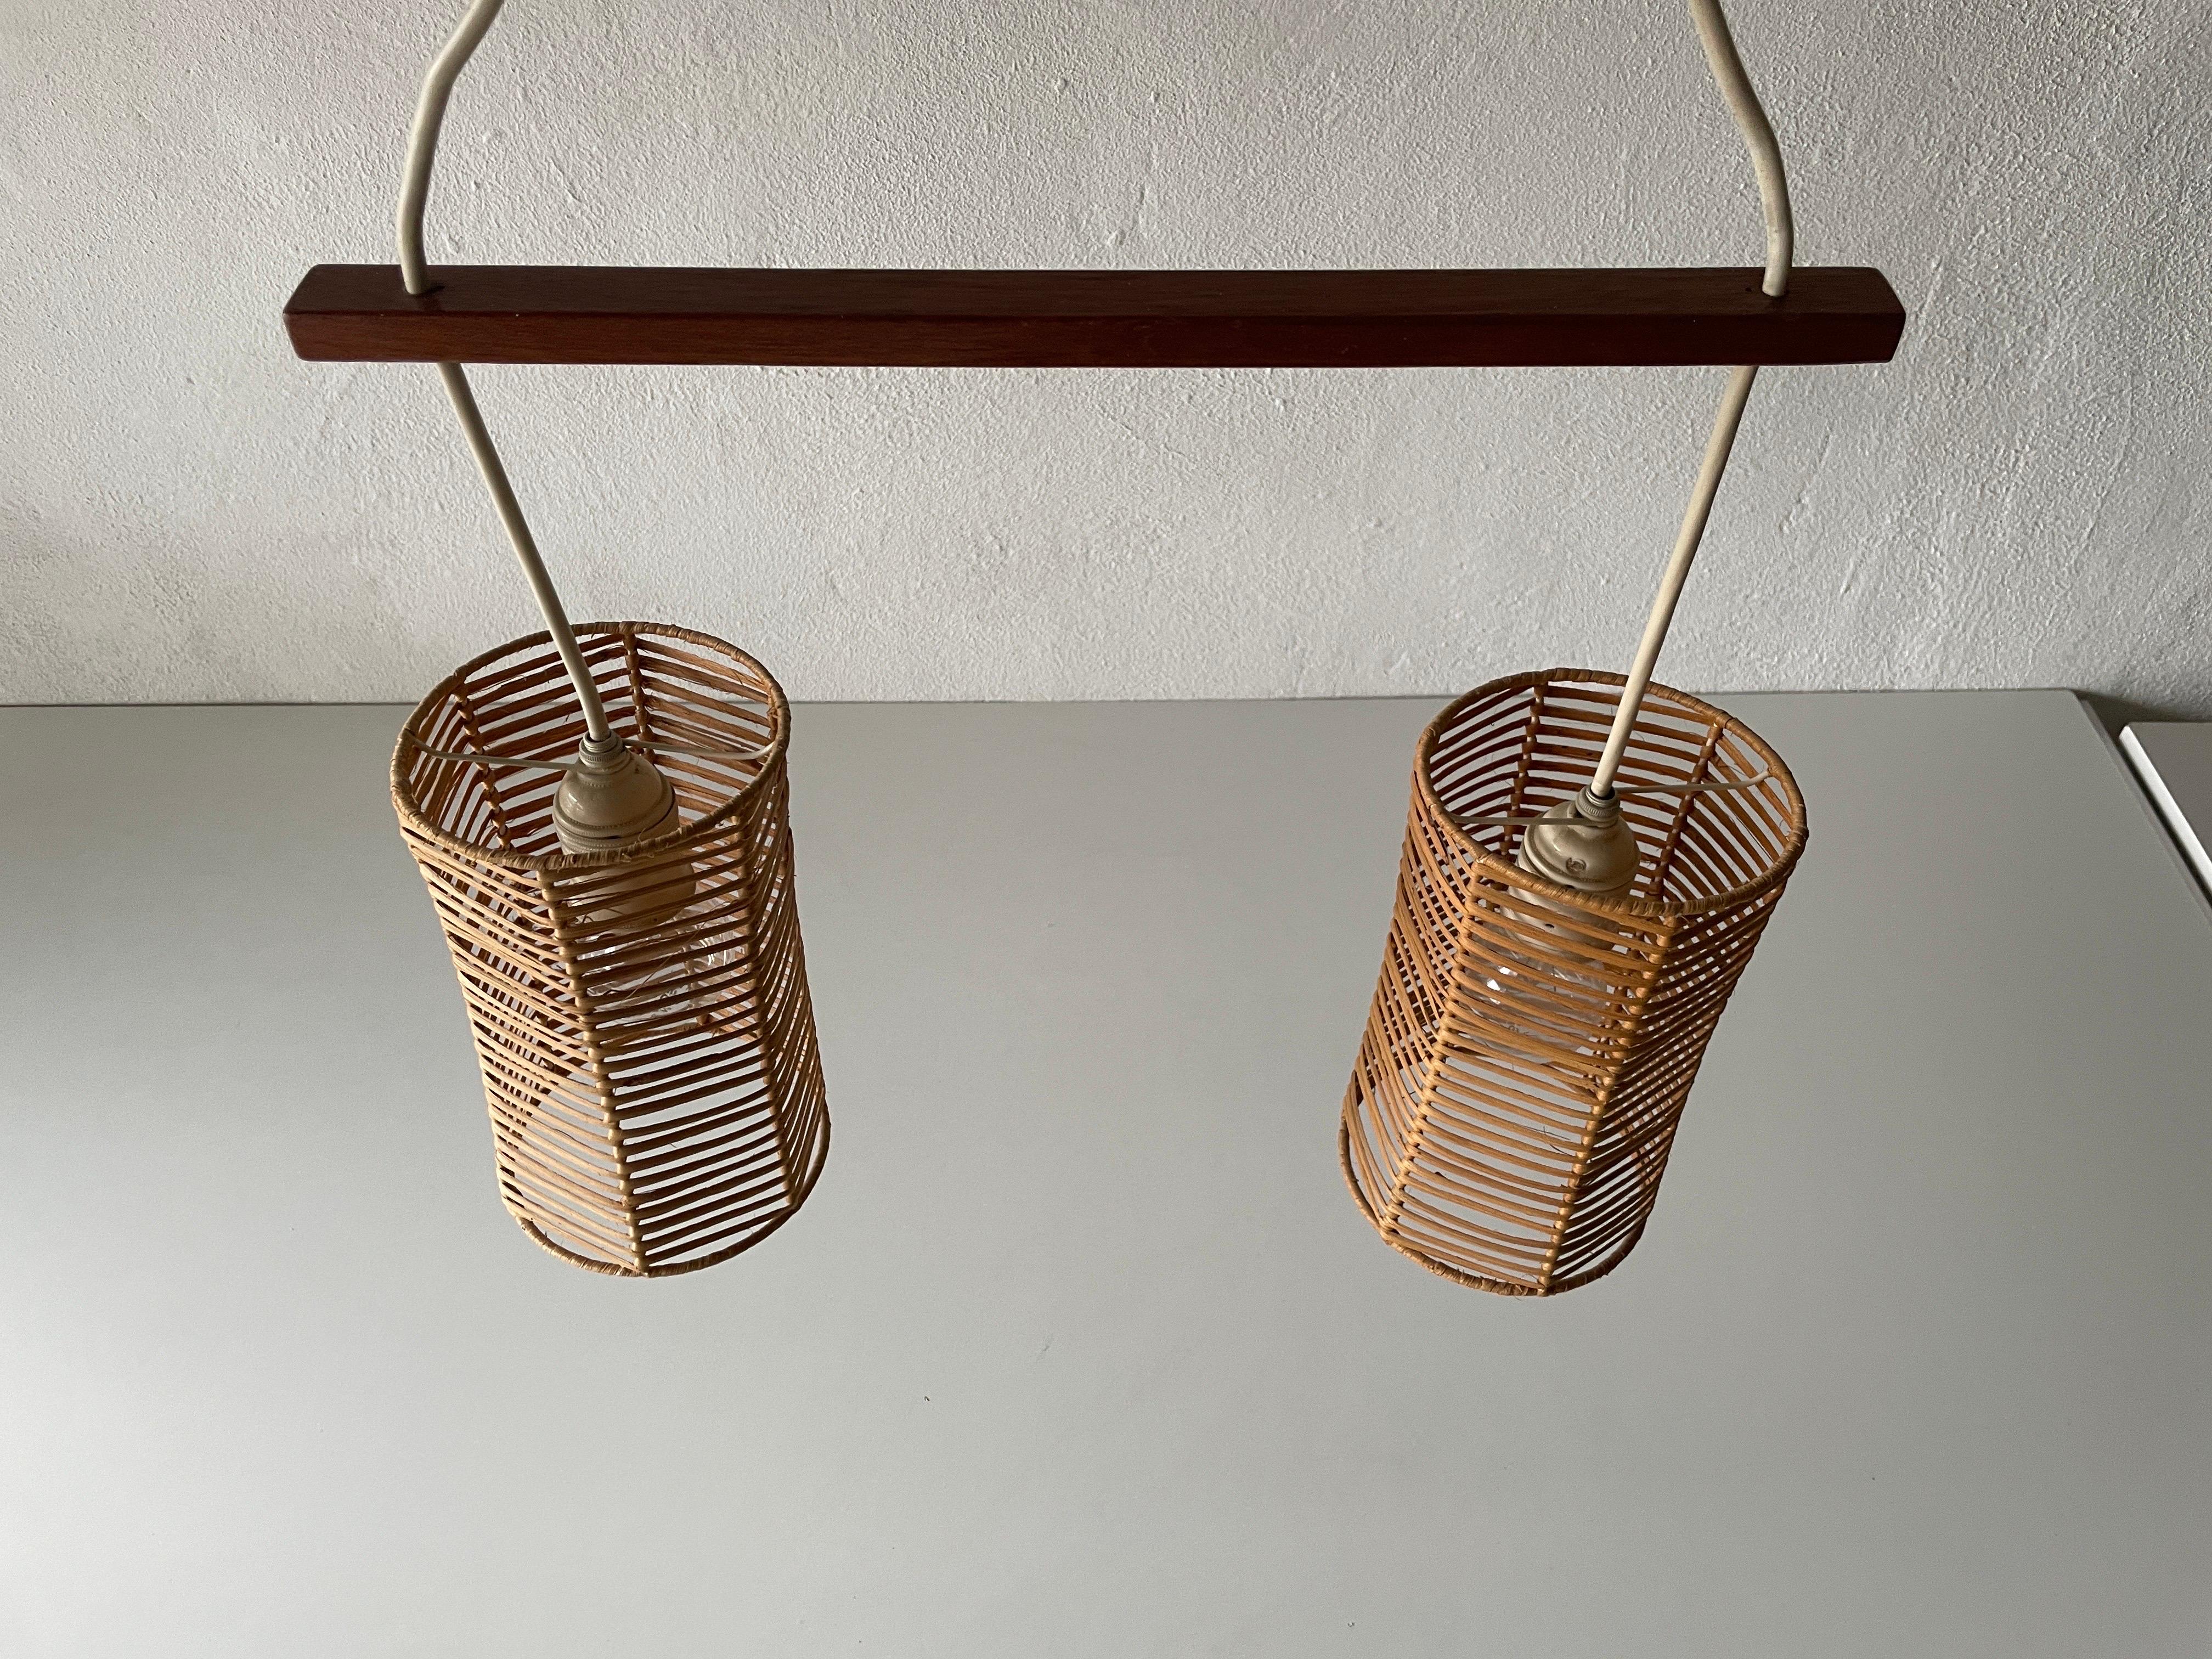 Double Shade Wicker and Wood Pendant Lamp, 1960s, Germany In Excellent Condition For Sale In Hagenbach, DE